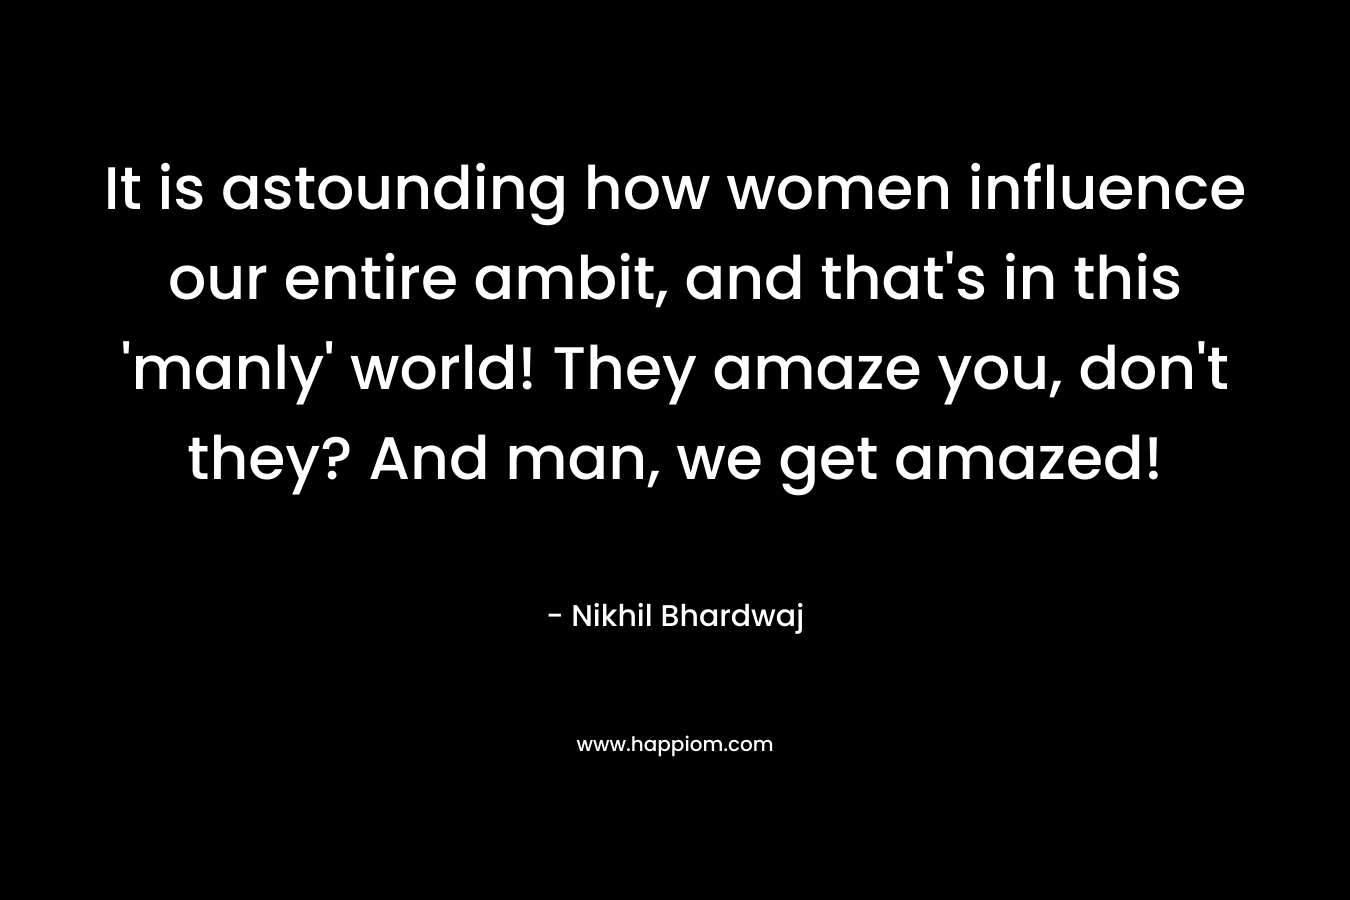 It is astounding how women influence our entire ambit, and that’s in this ‘manly’ world! They amaze you, don’t they? And man, we get amazed! – Nikhil Bhardwaj